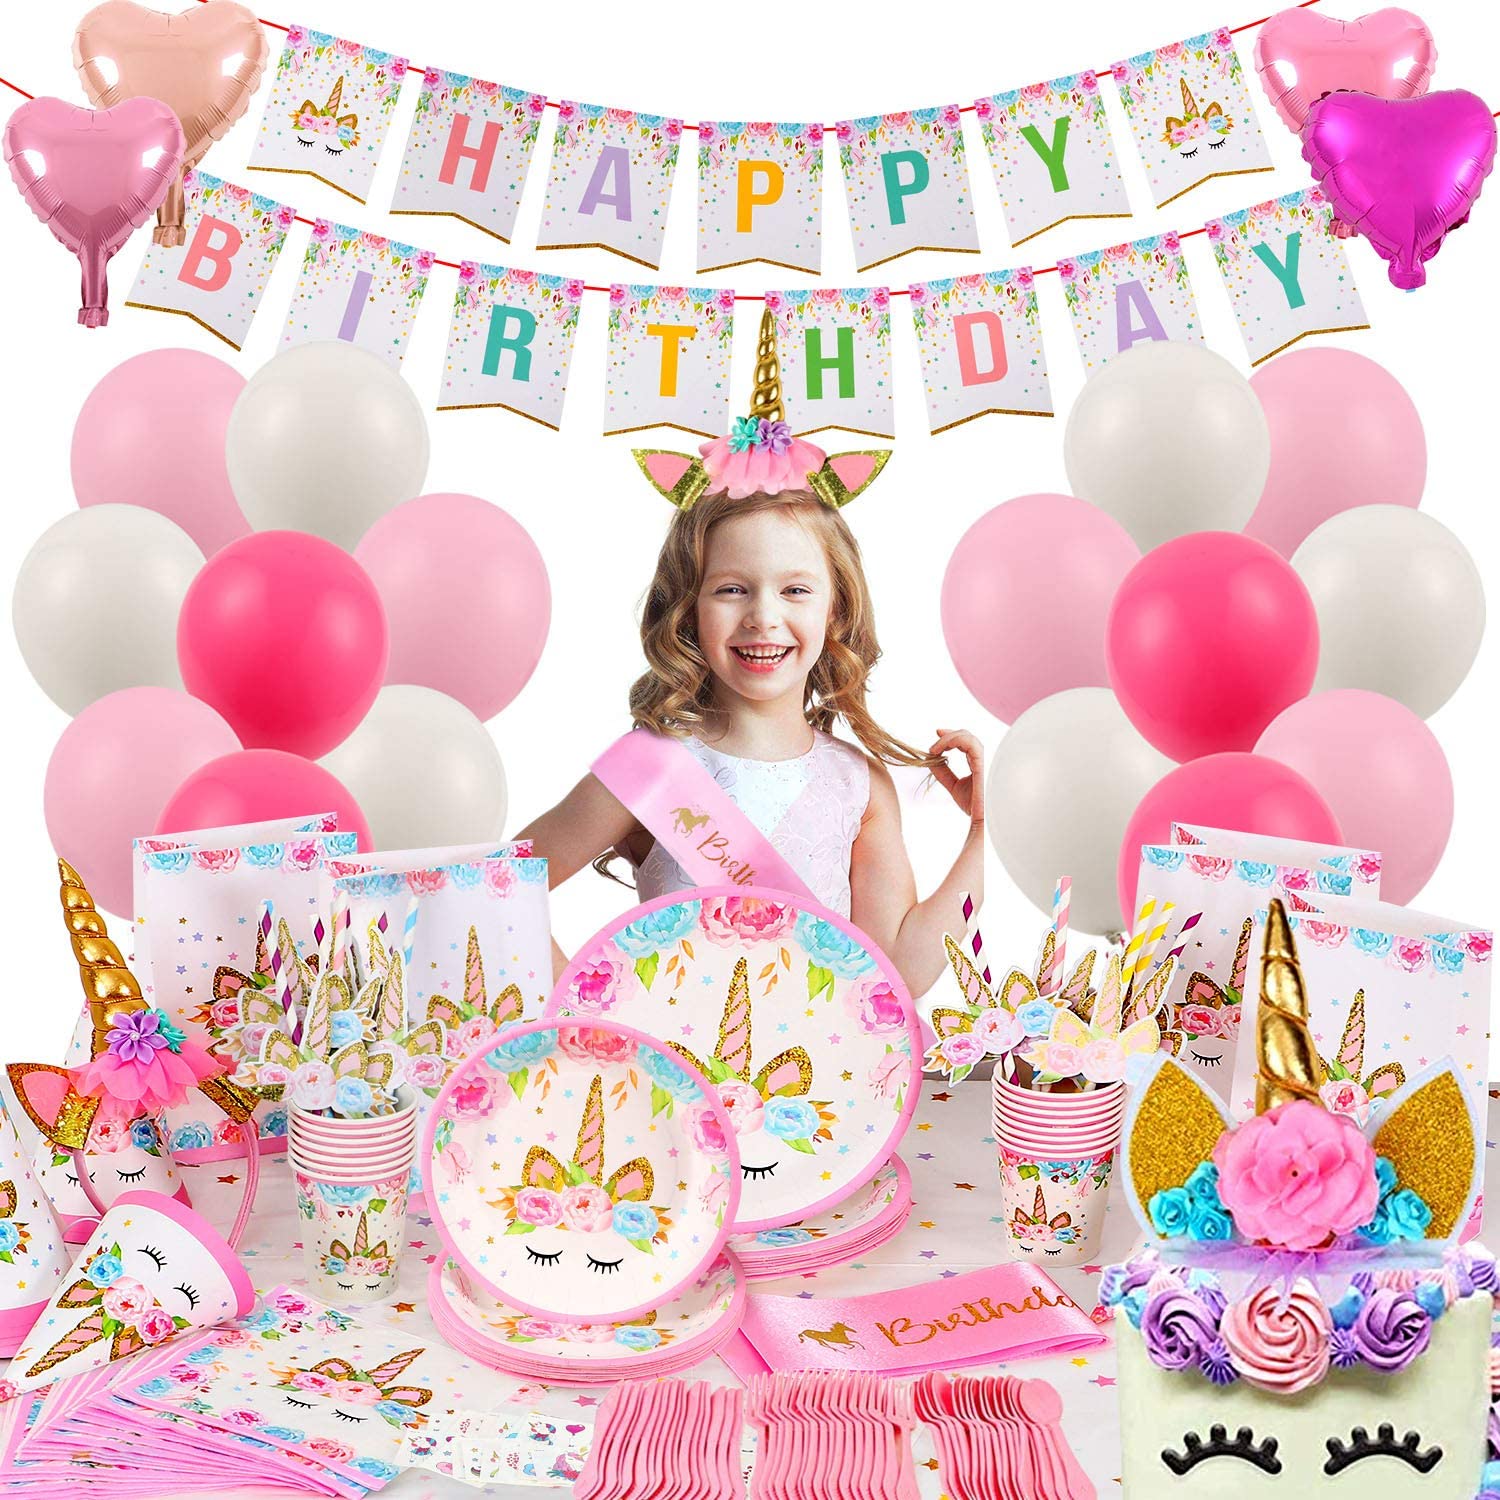 Birthday-Party-Decoration-Kit-for-Girls